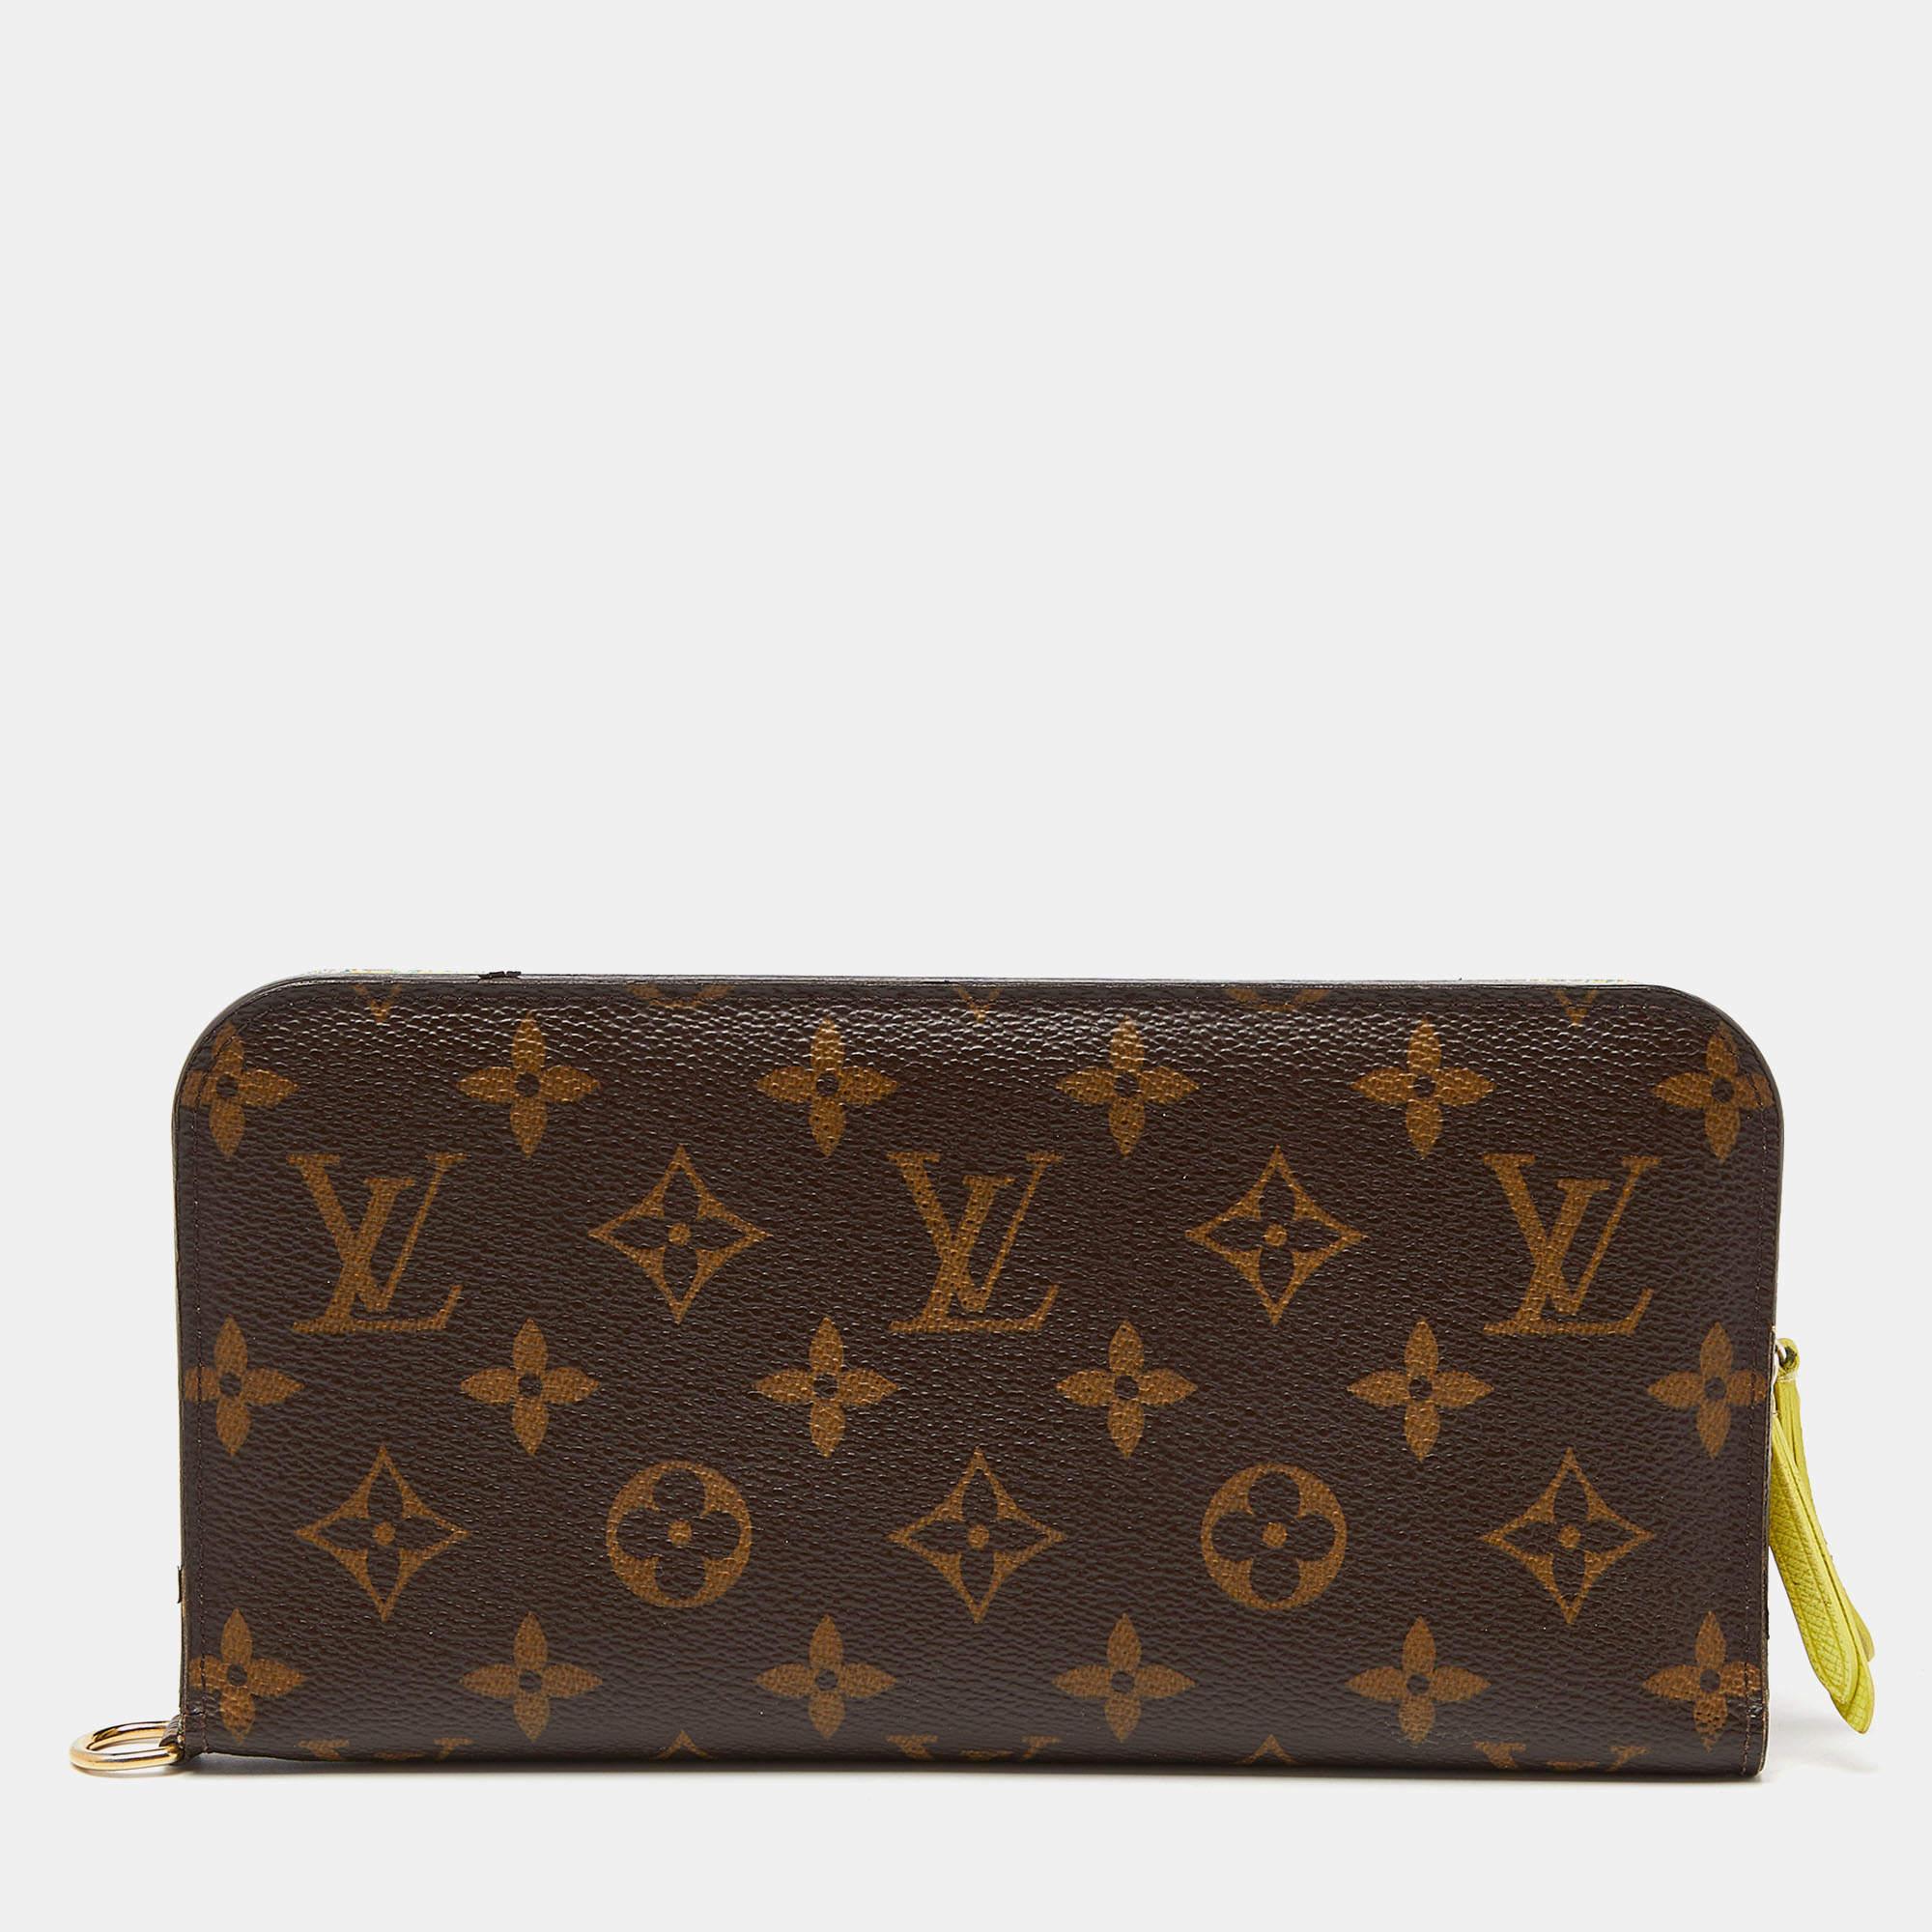 A wallet should not only be good-looking but also functional, just like this pretty Insolite from Louis Vuitton. Crafted in Spain, this gorgeous number flaunts the signature monogram on the canvas exterior and has a zip compartment and snap buttons